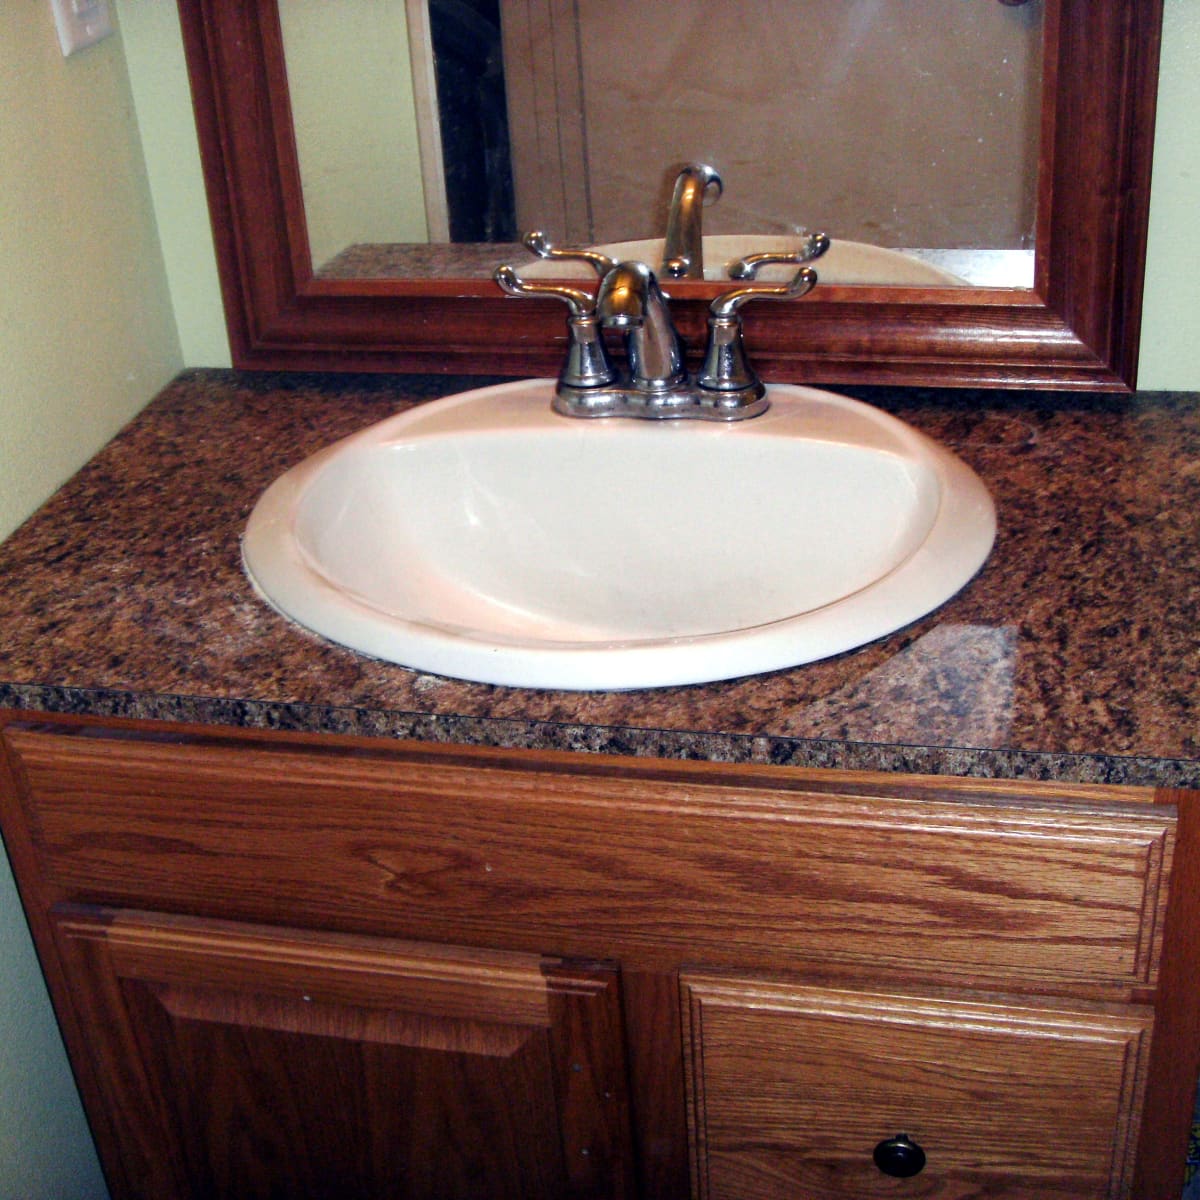 How To Install Laminate Formica For A, Laminate Vanity Tops For Bathrooms